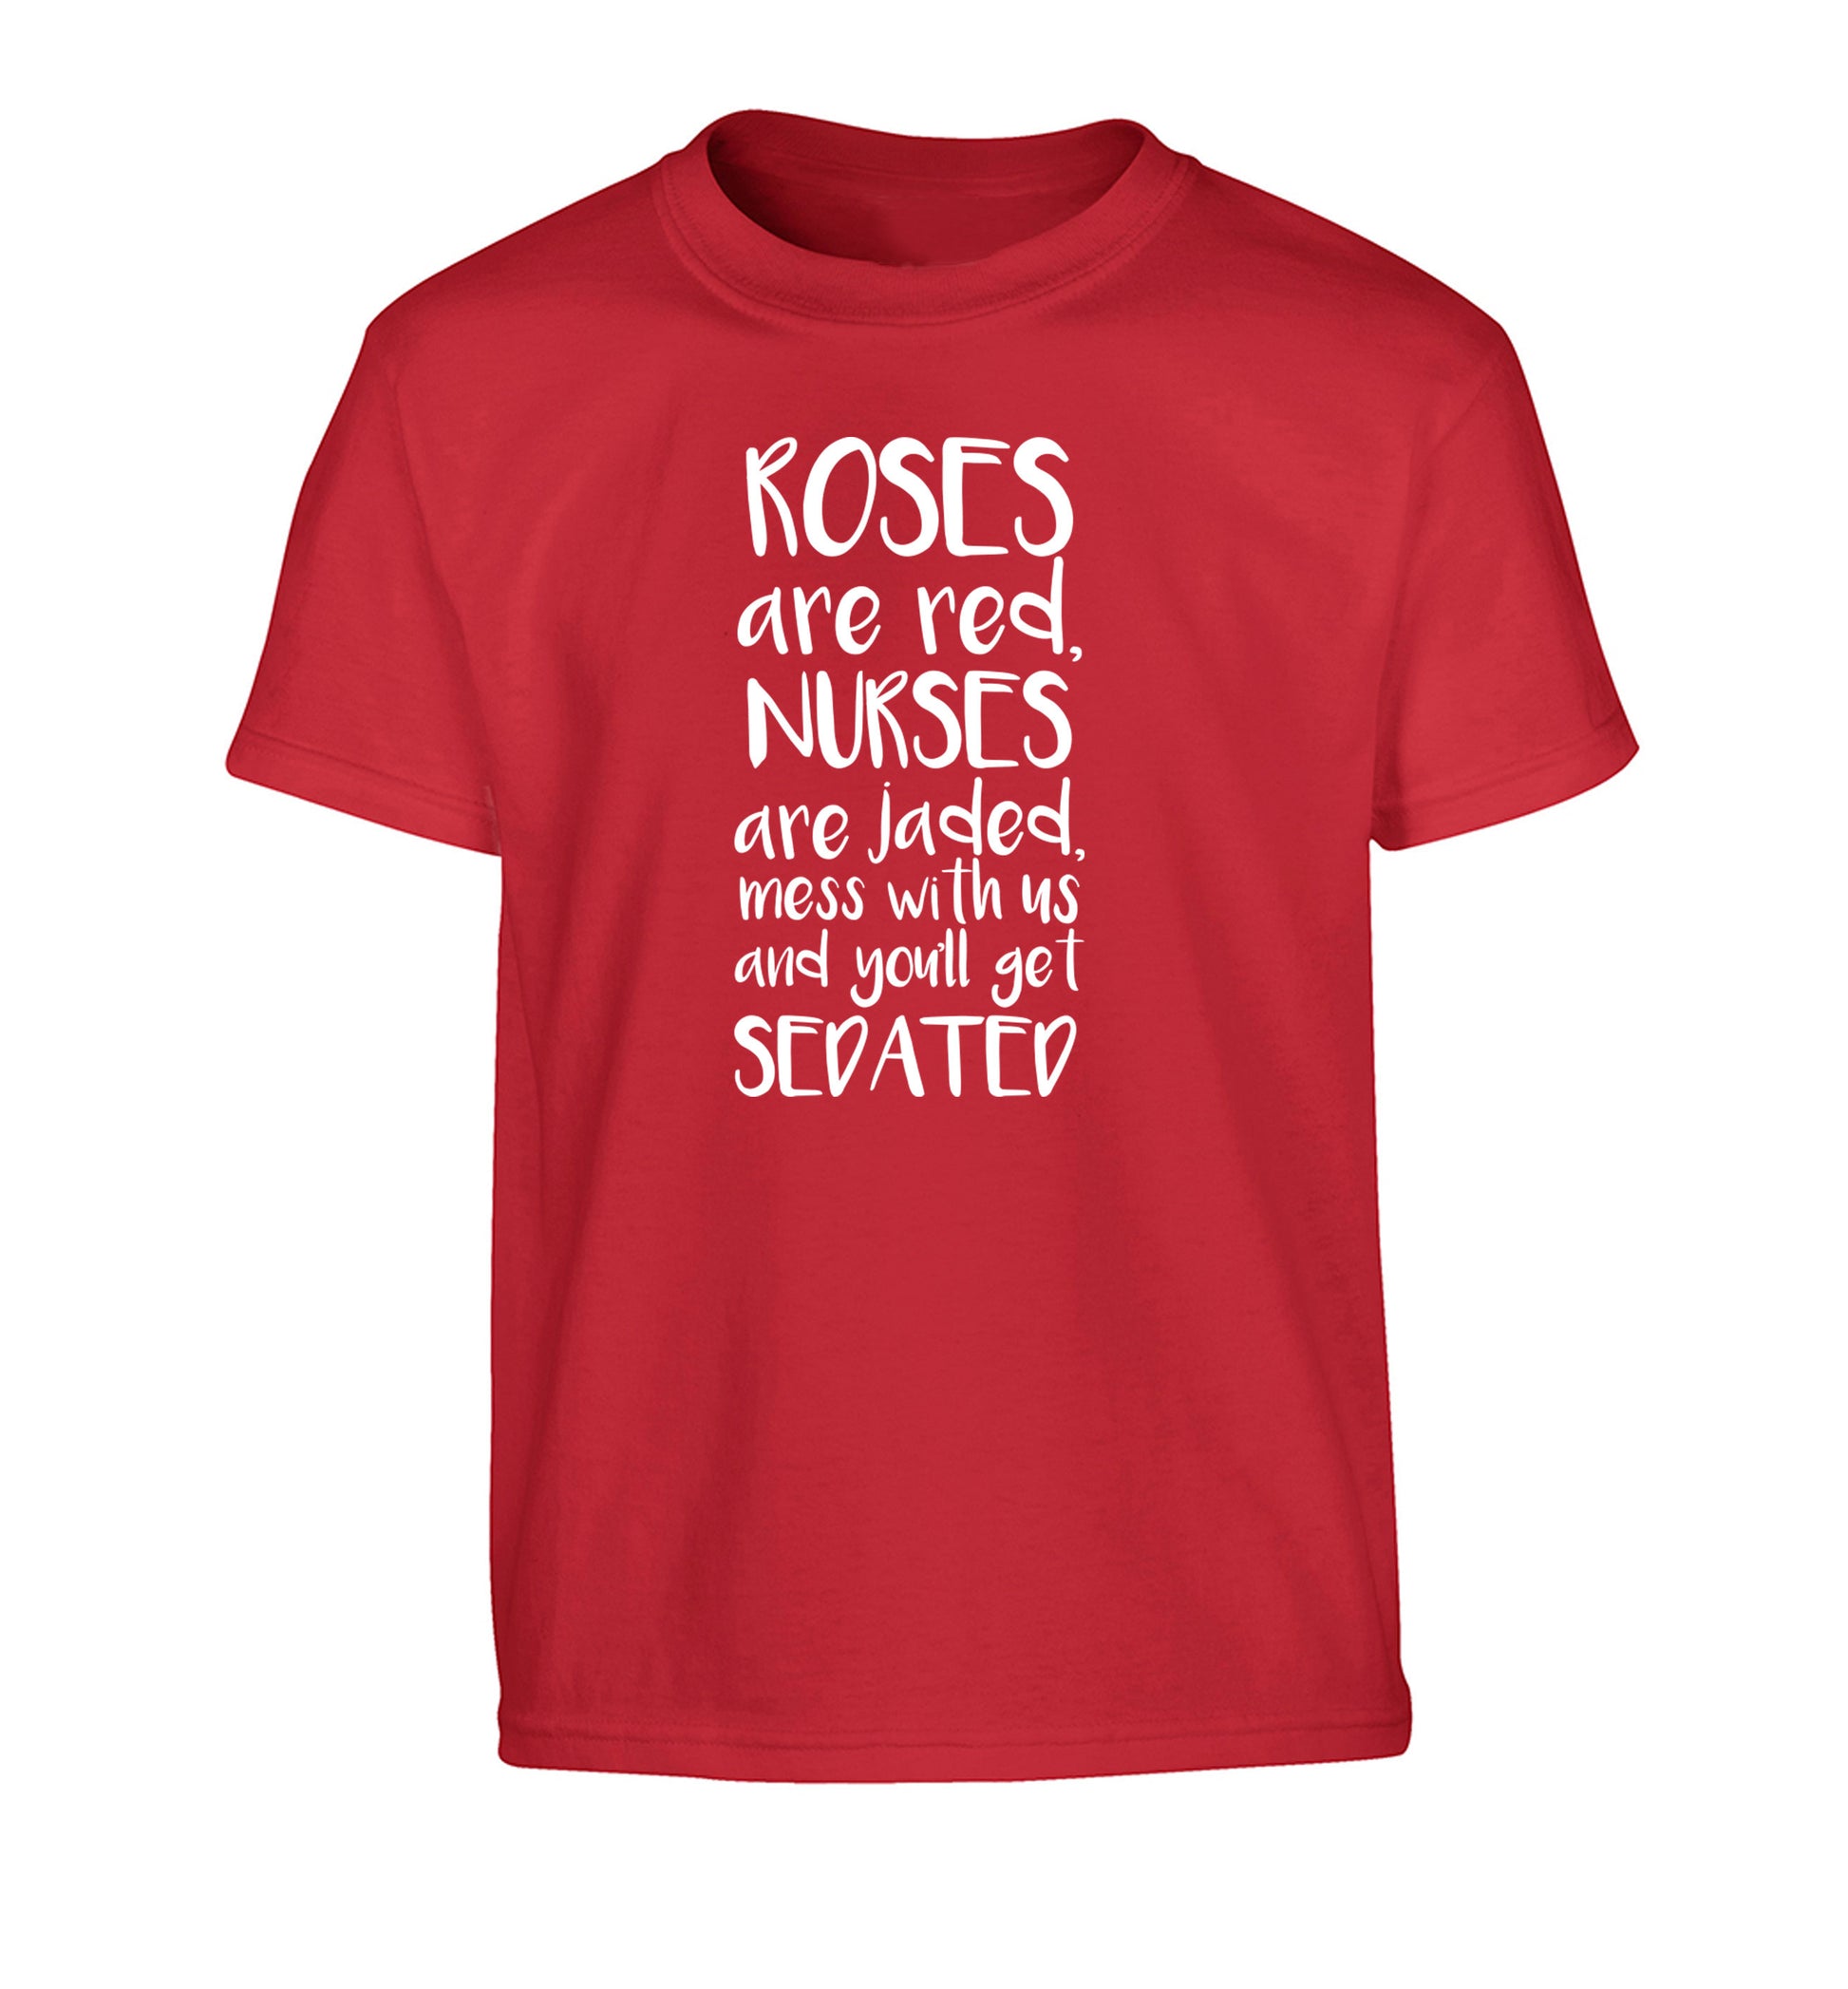 Roses are red, nurses are jaded, mess with us and you'll get sedated Children's red Tshirt 12-14 Years